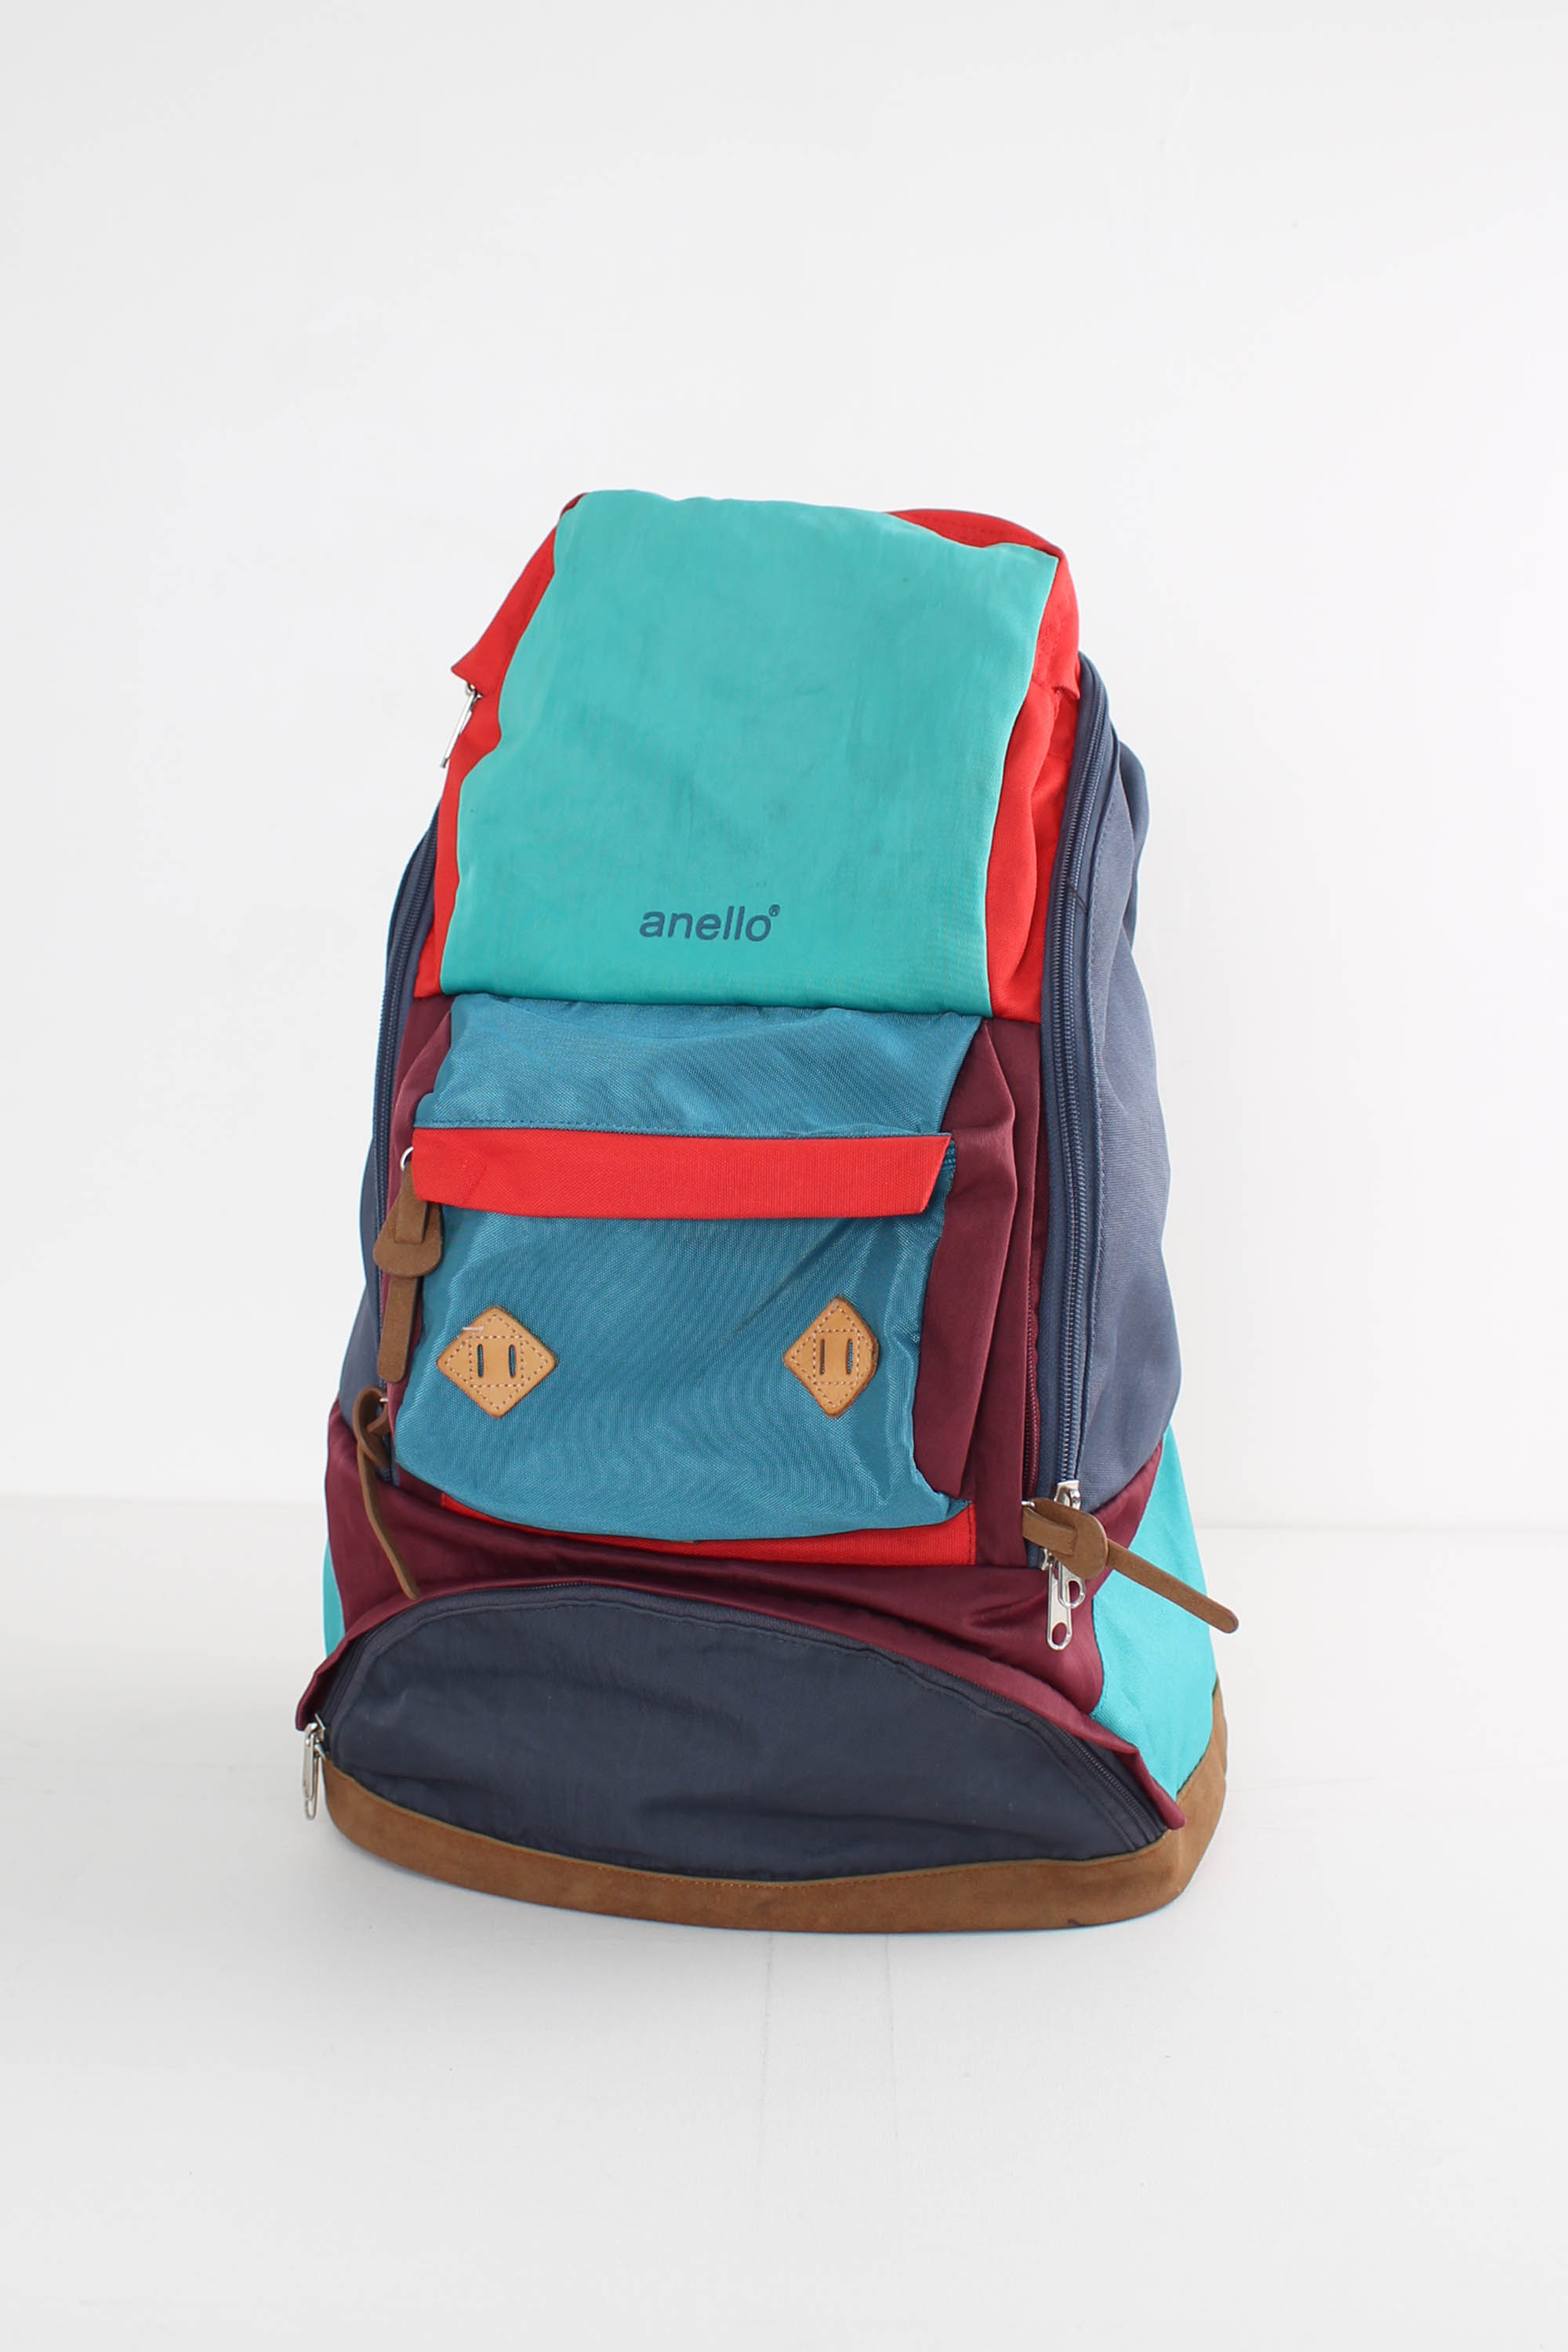 anello backpack